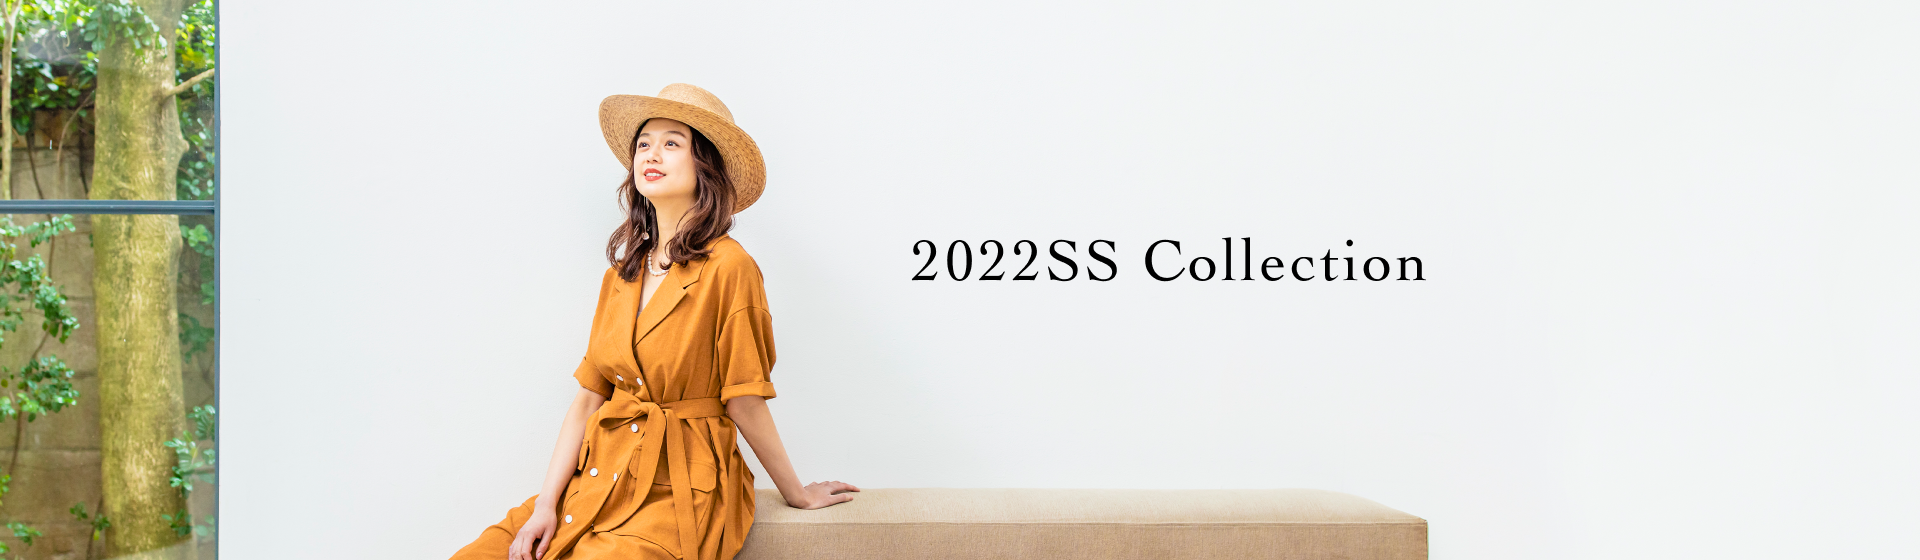 2022SS Collection